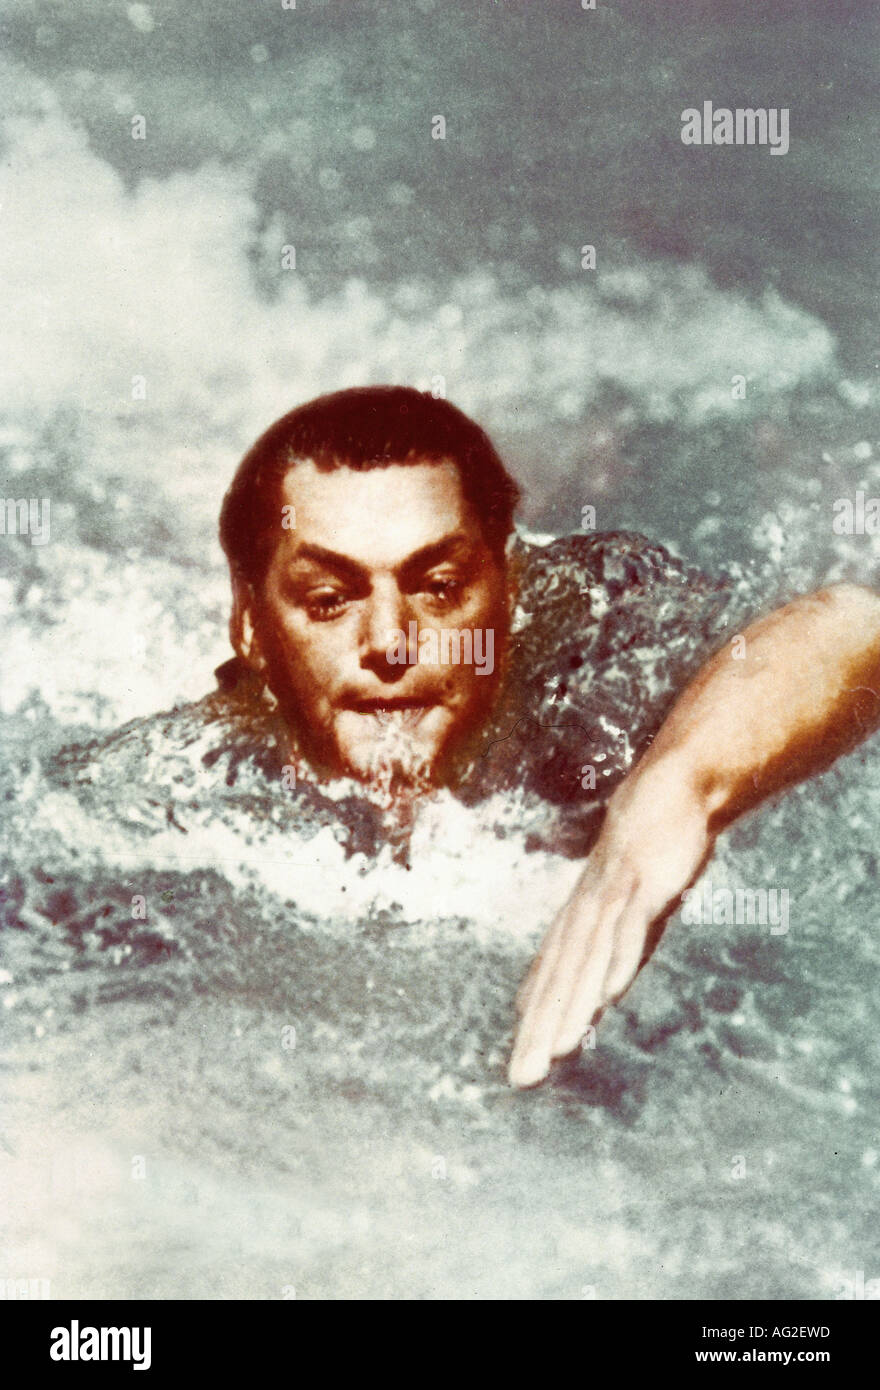 Weissmüller, Johnny, 2.6.1904 - 20.1.1984, American athlete (swimming) and actor, portrait, Olympic Games, Paris, France, 1924, Stock Photo